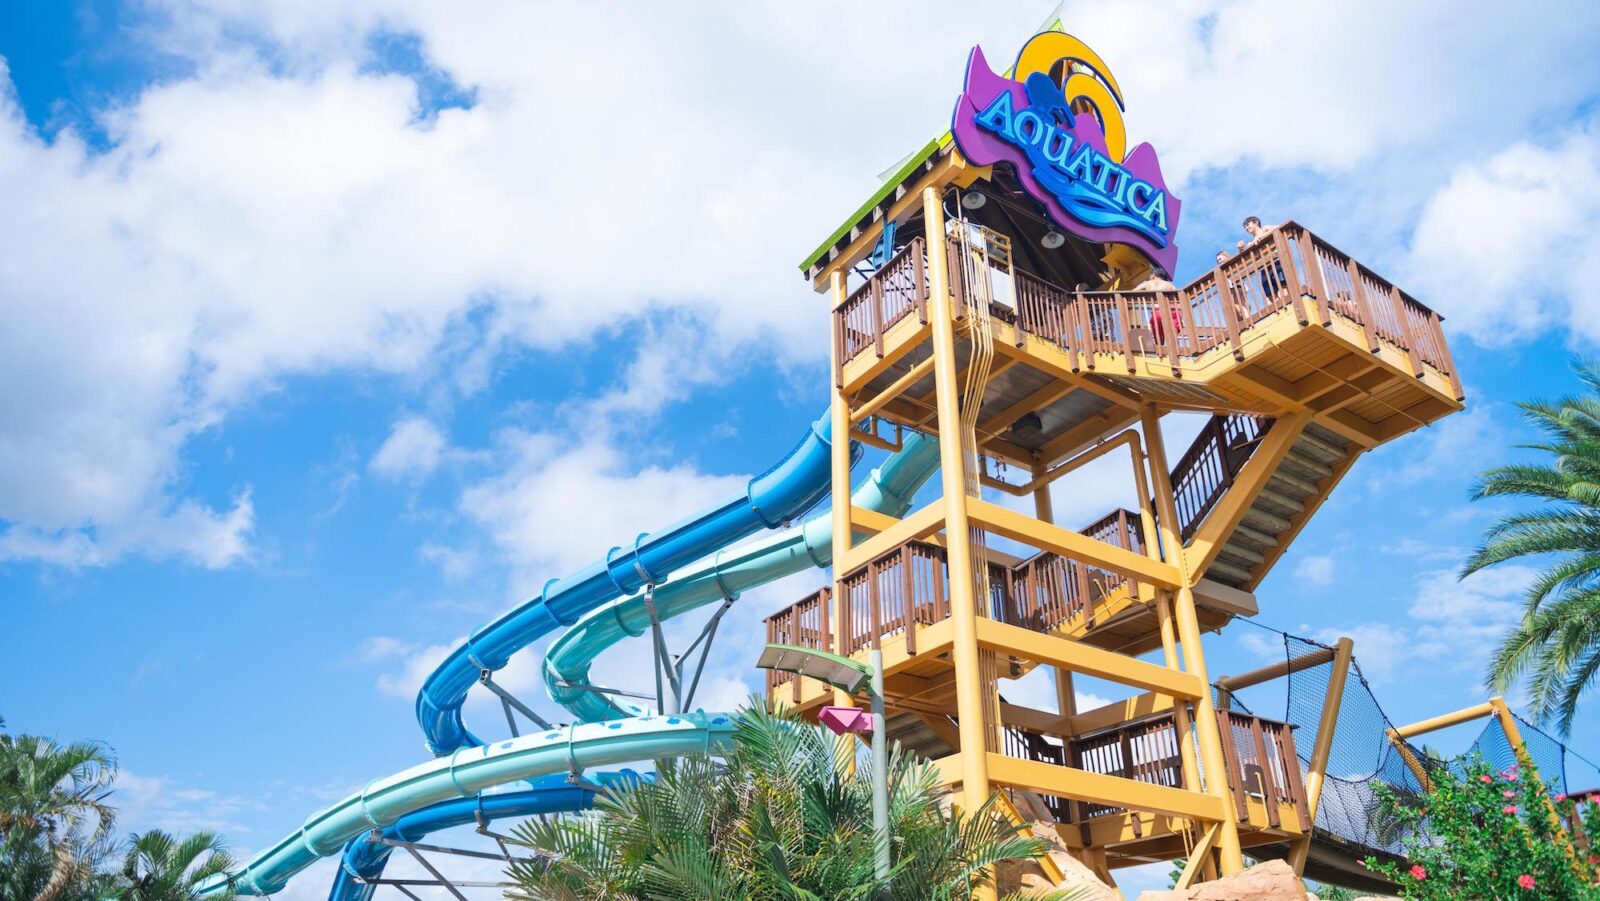 daytime view of large slide at Aquatica Orlando water theme park